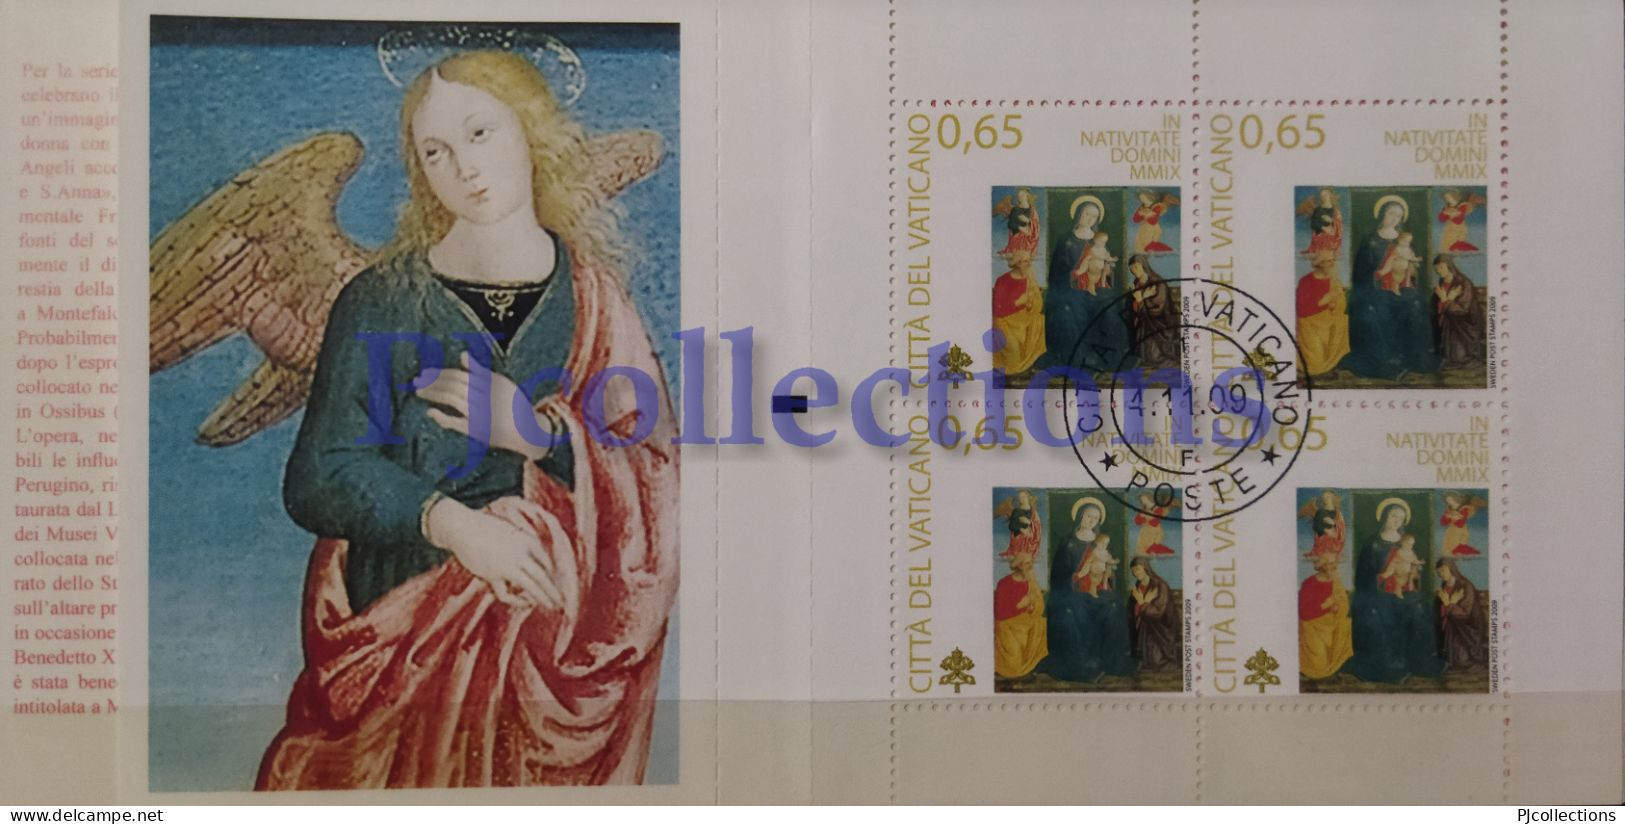 3763- VATICANO- VATICAN CITY 2009 NATALE - CHRISTMAS FULL BOOKLET 4 STAMPS C/ANNULLO 1° GIORNO - USED - Gebraucht